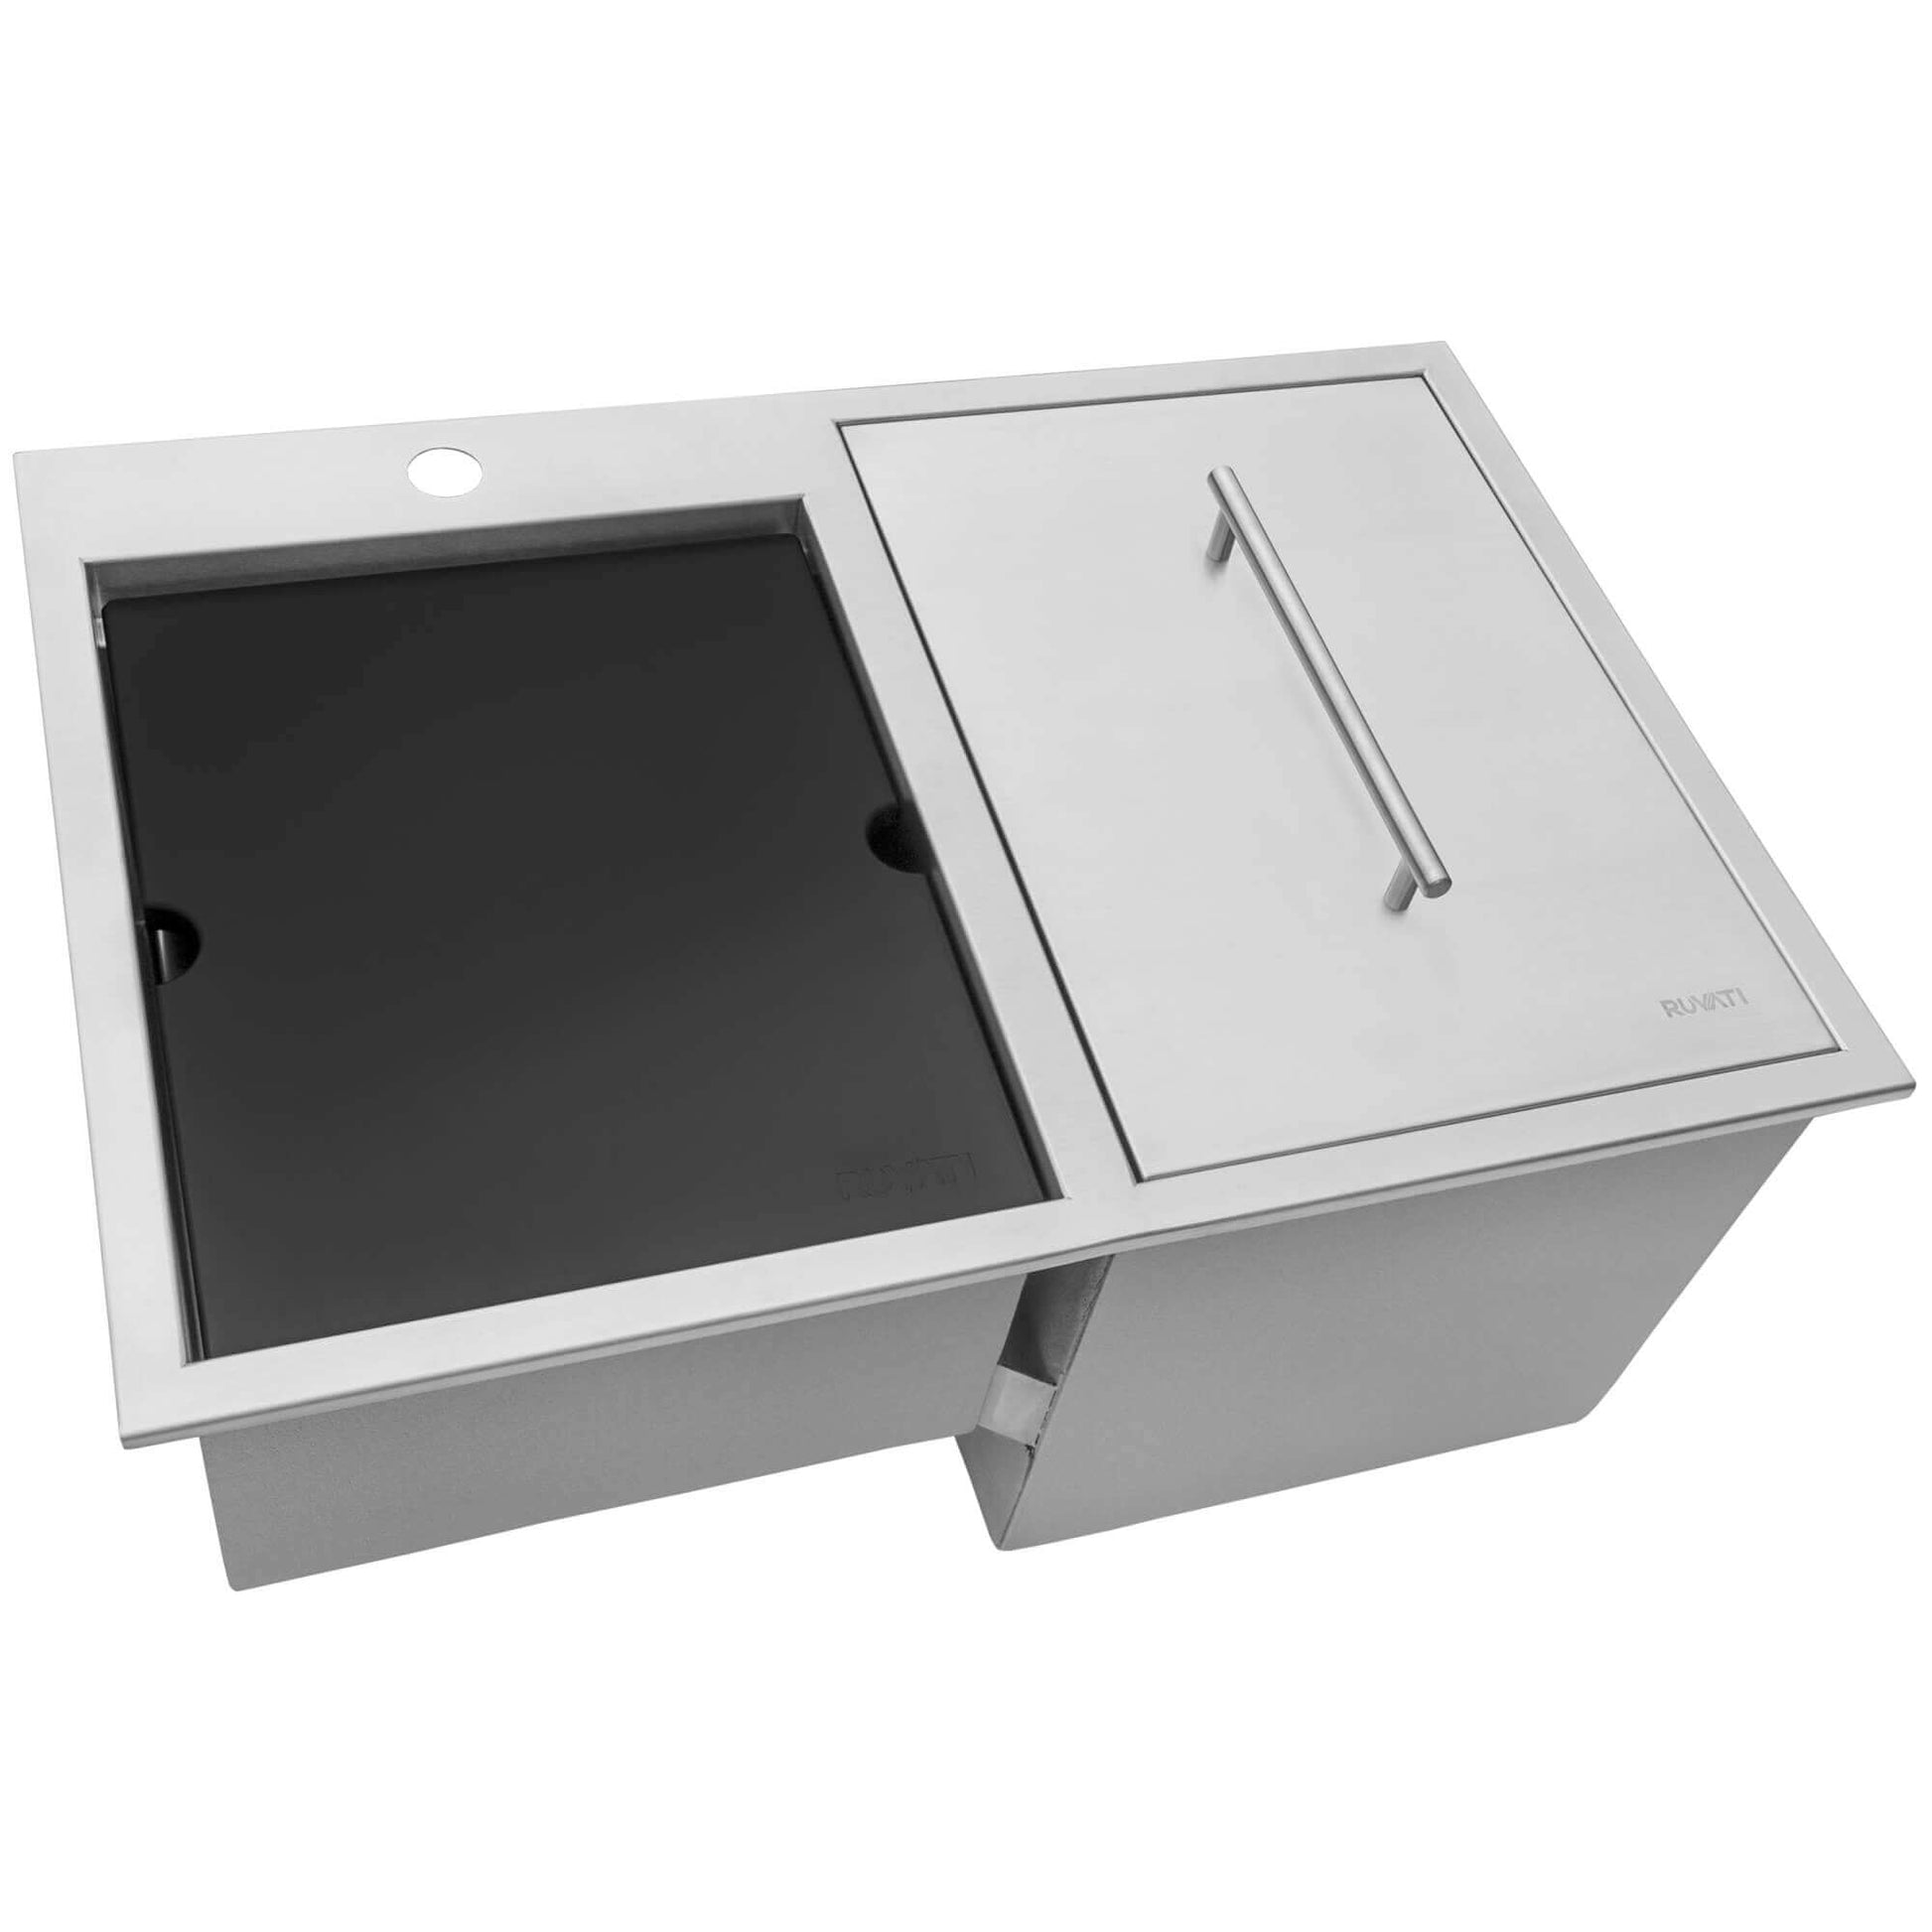 Ruvati Insulated Ice Chest and Outdoor Sink - Showing Included Ice Chest Lid and Cutting Board